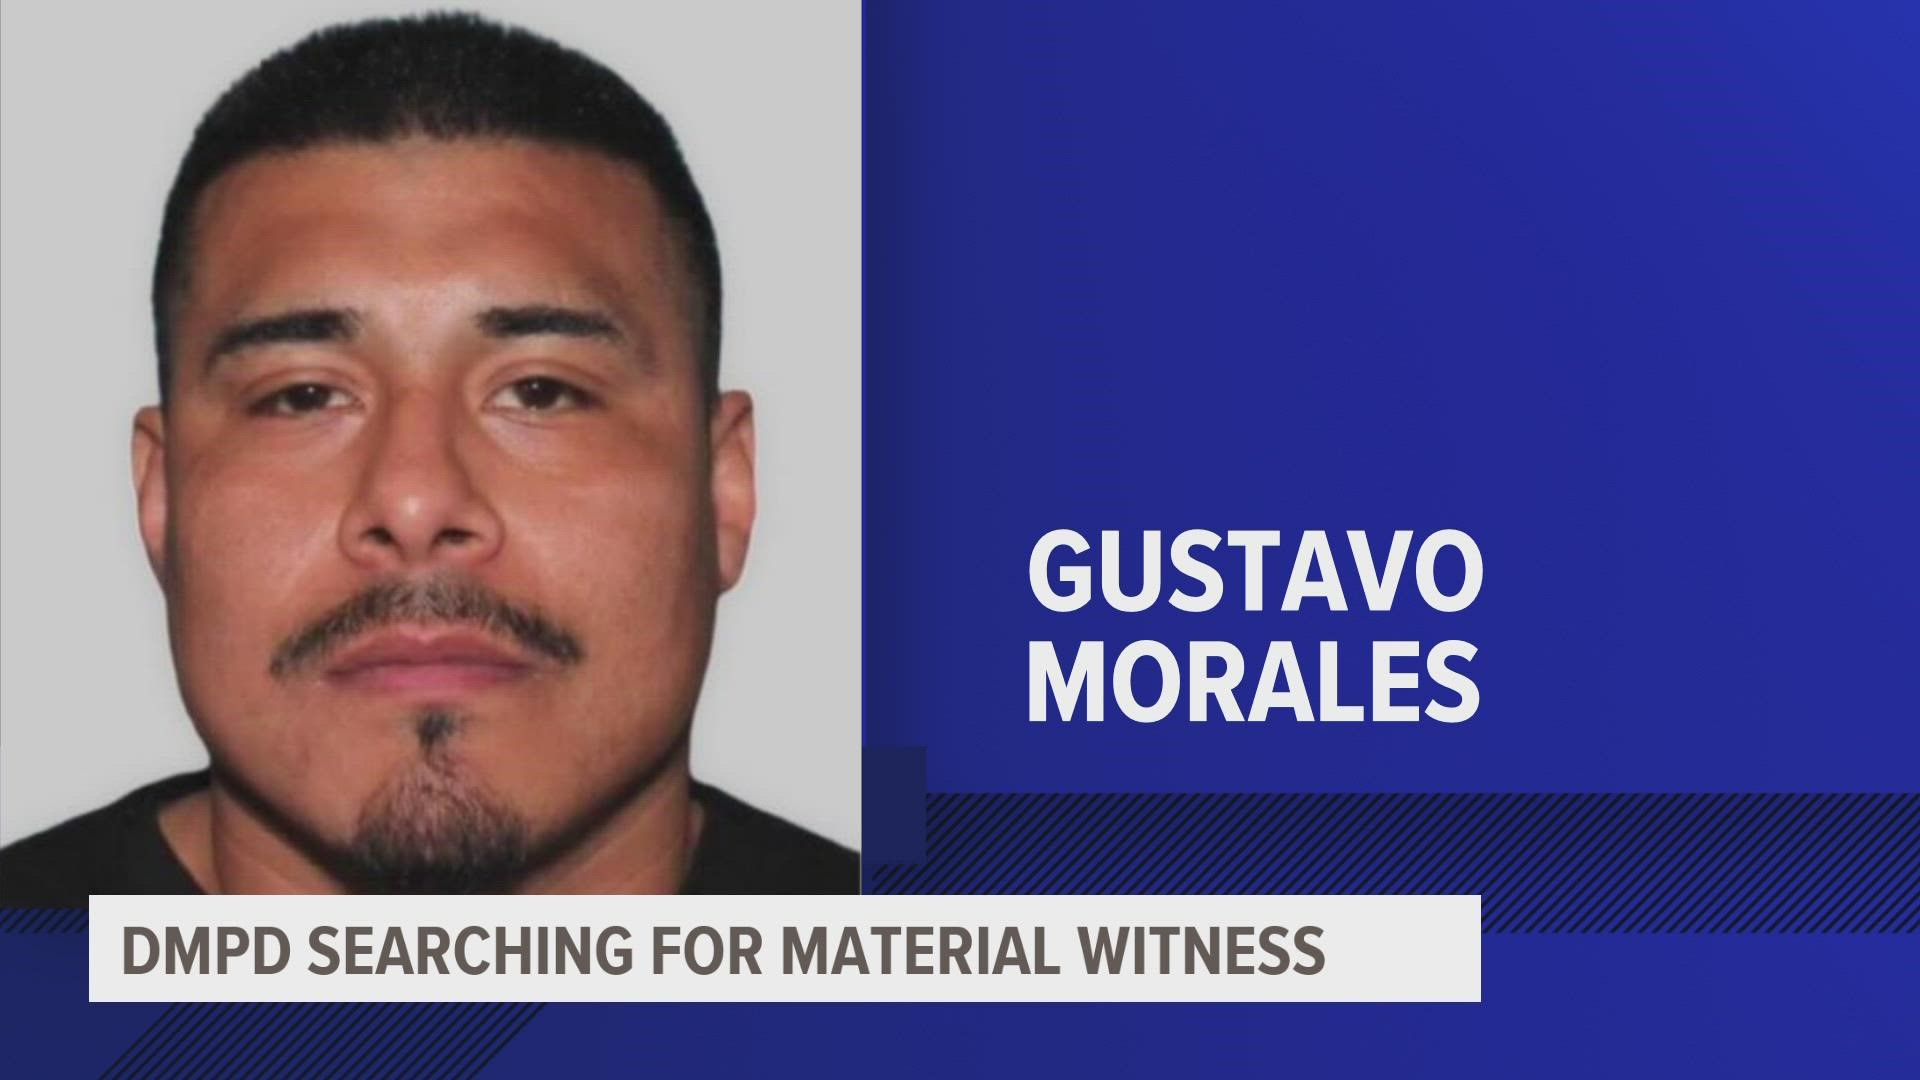 Responders found Daniel Lovett deceased with a gunshot wound in a yard Sunday. Now, they are searching for 30-year-old Gustavo Morales as a material witness.